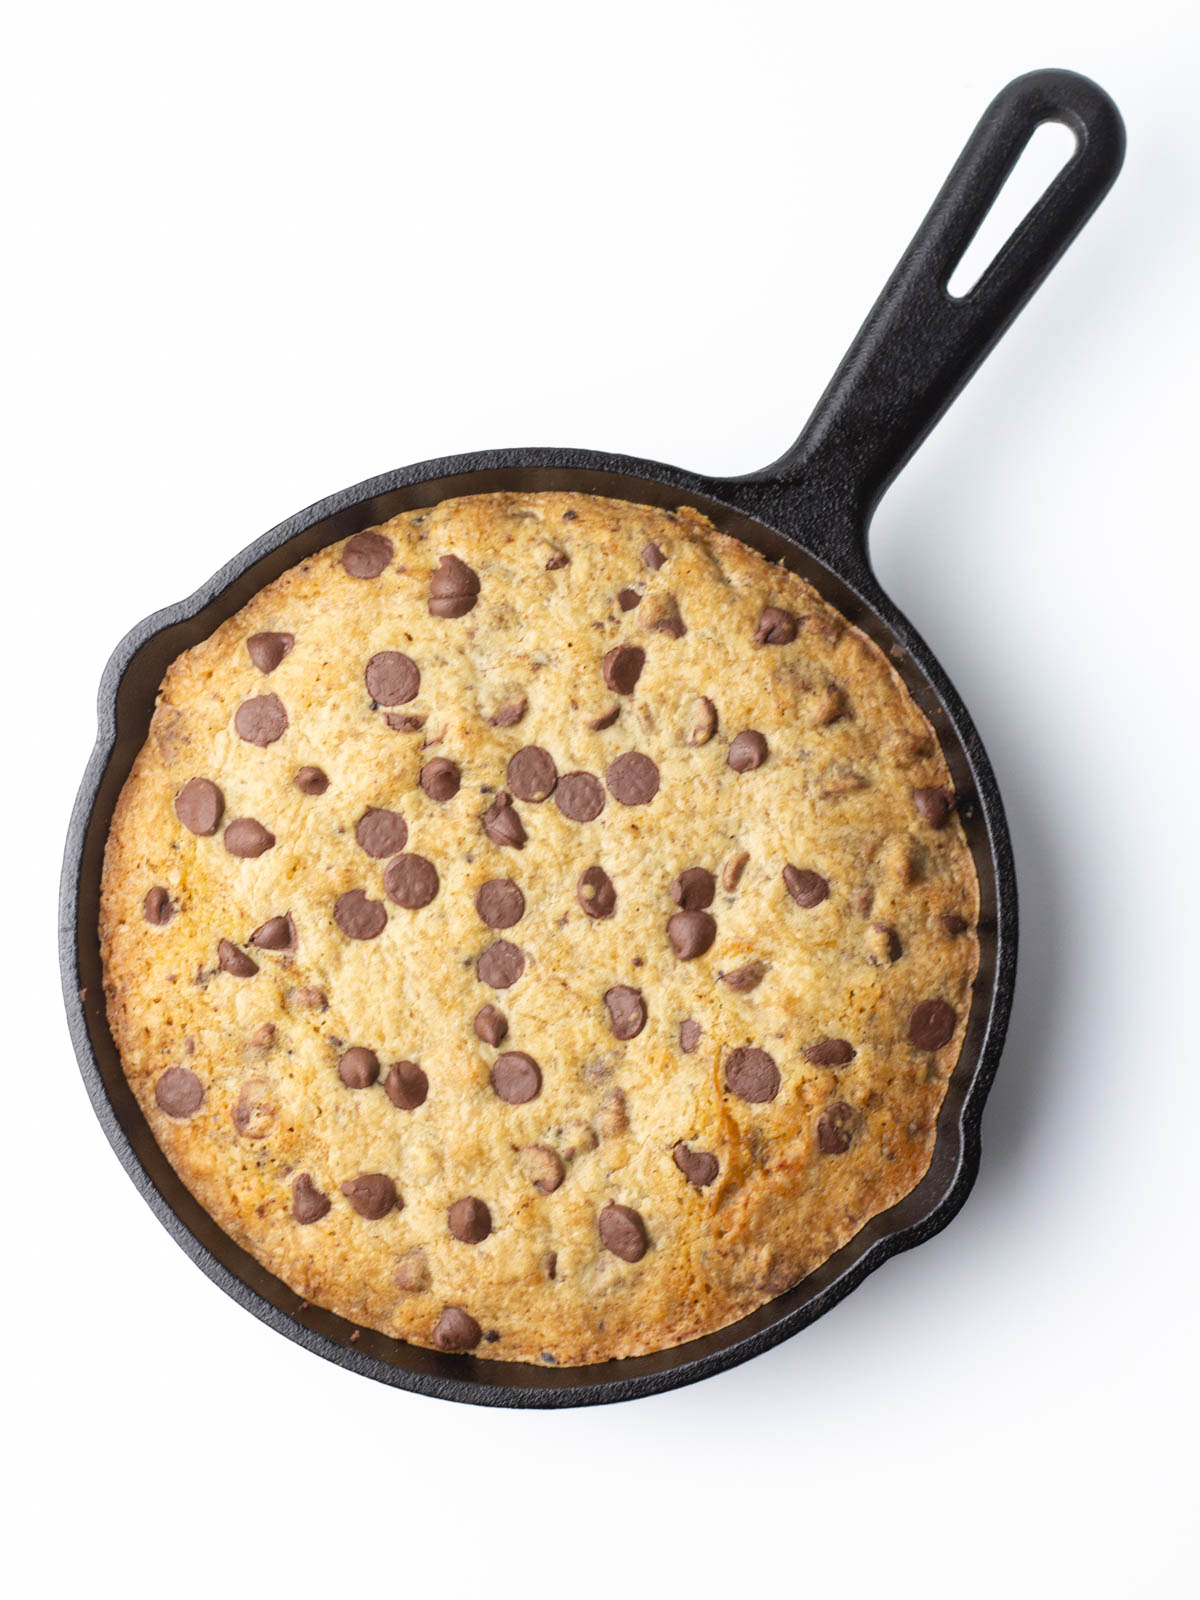 A baked chocolate chip cookie in a cast iron skillet.